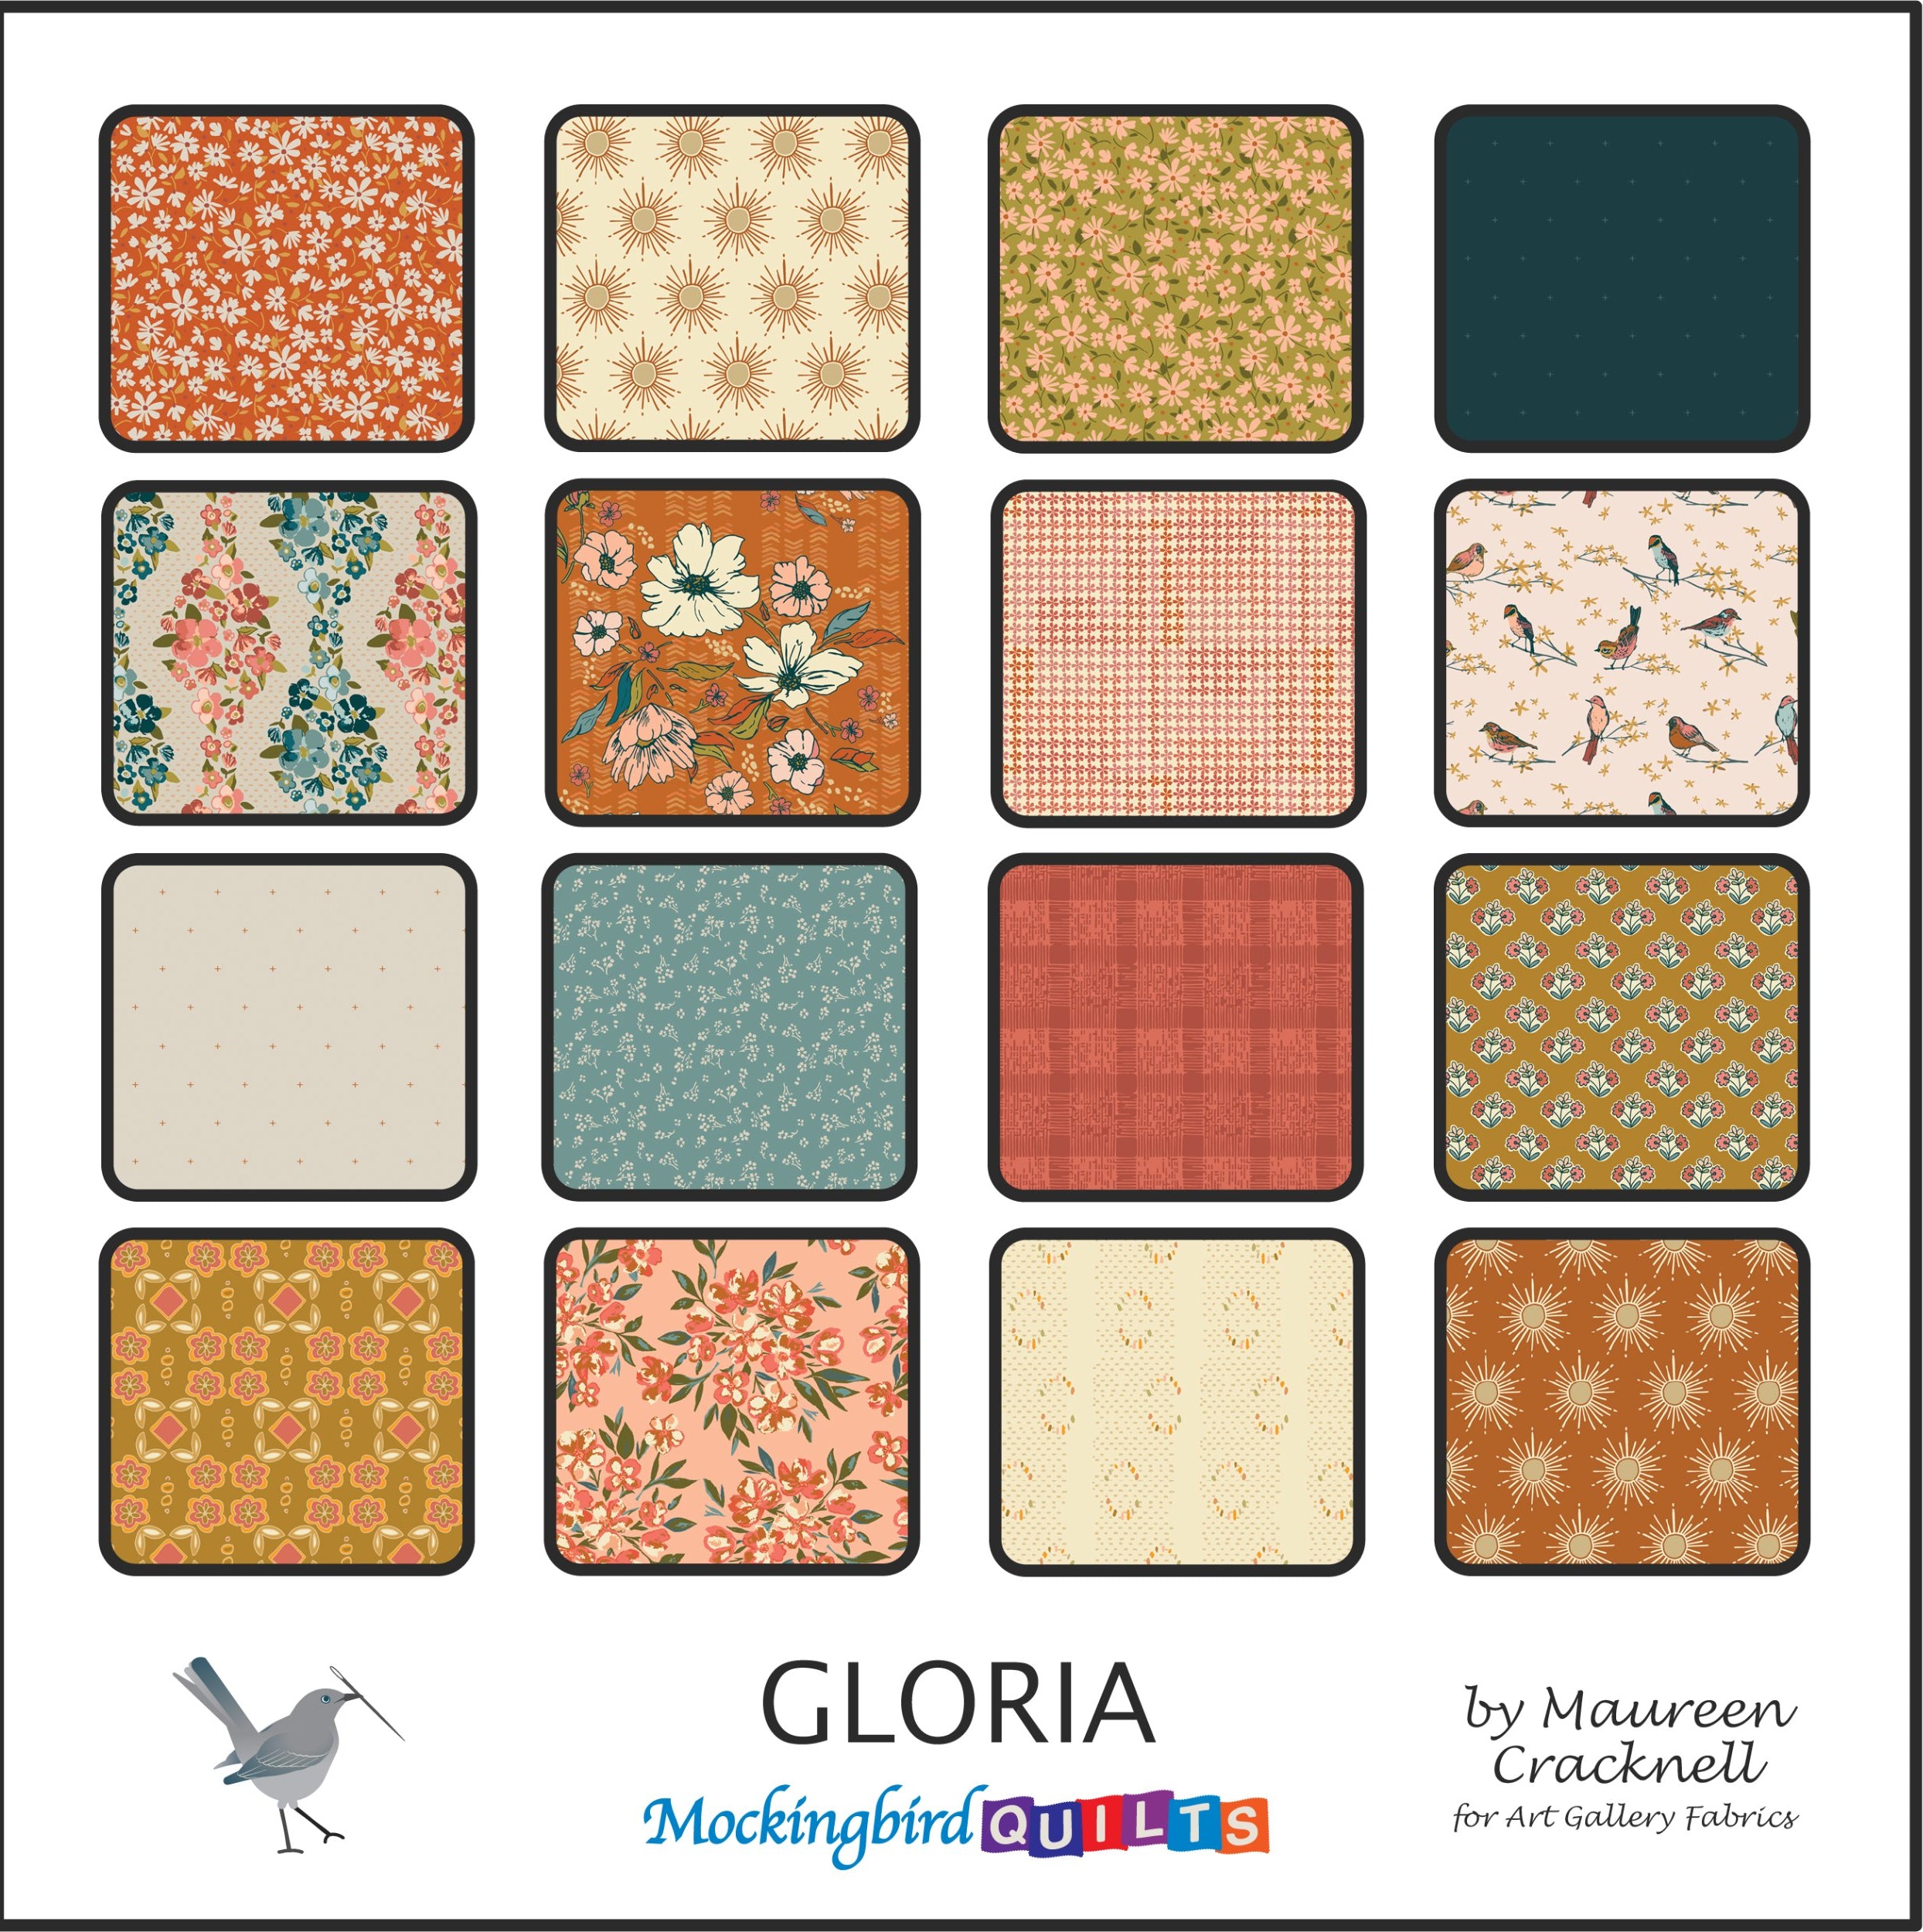 This image shows sixteen fabric swatches in the collection “Gloria” by Maureen Cracknell. The color palette is warm with lots of golds, oranges, pinks, and pops of blue. The patterns are nature-inspired with many florals.